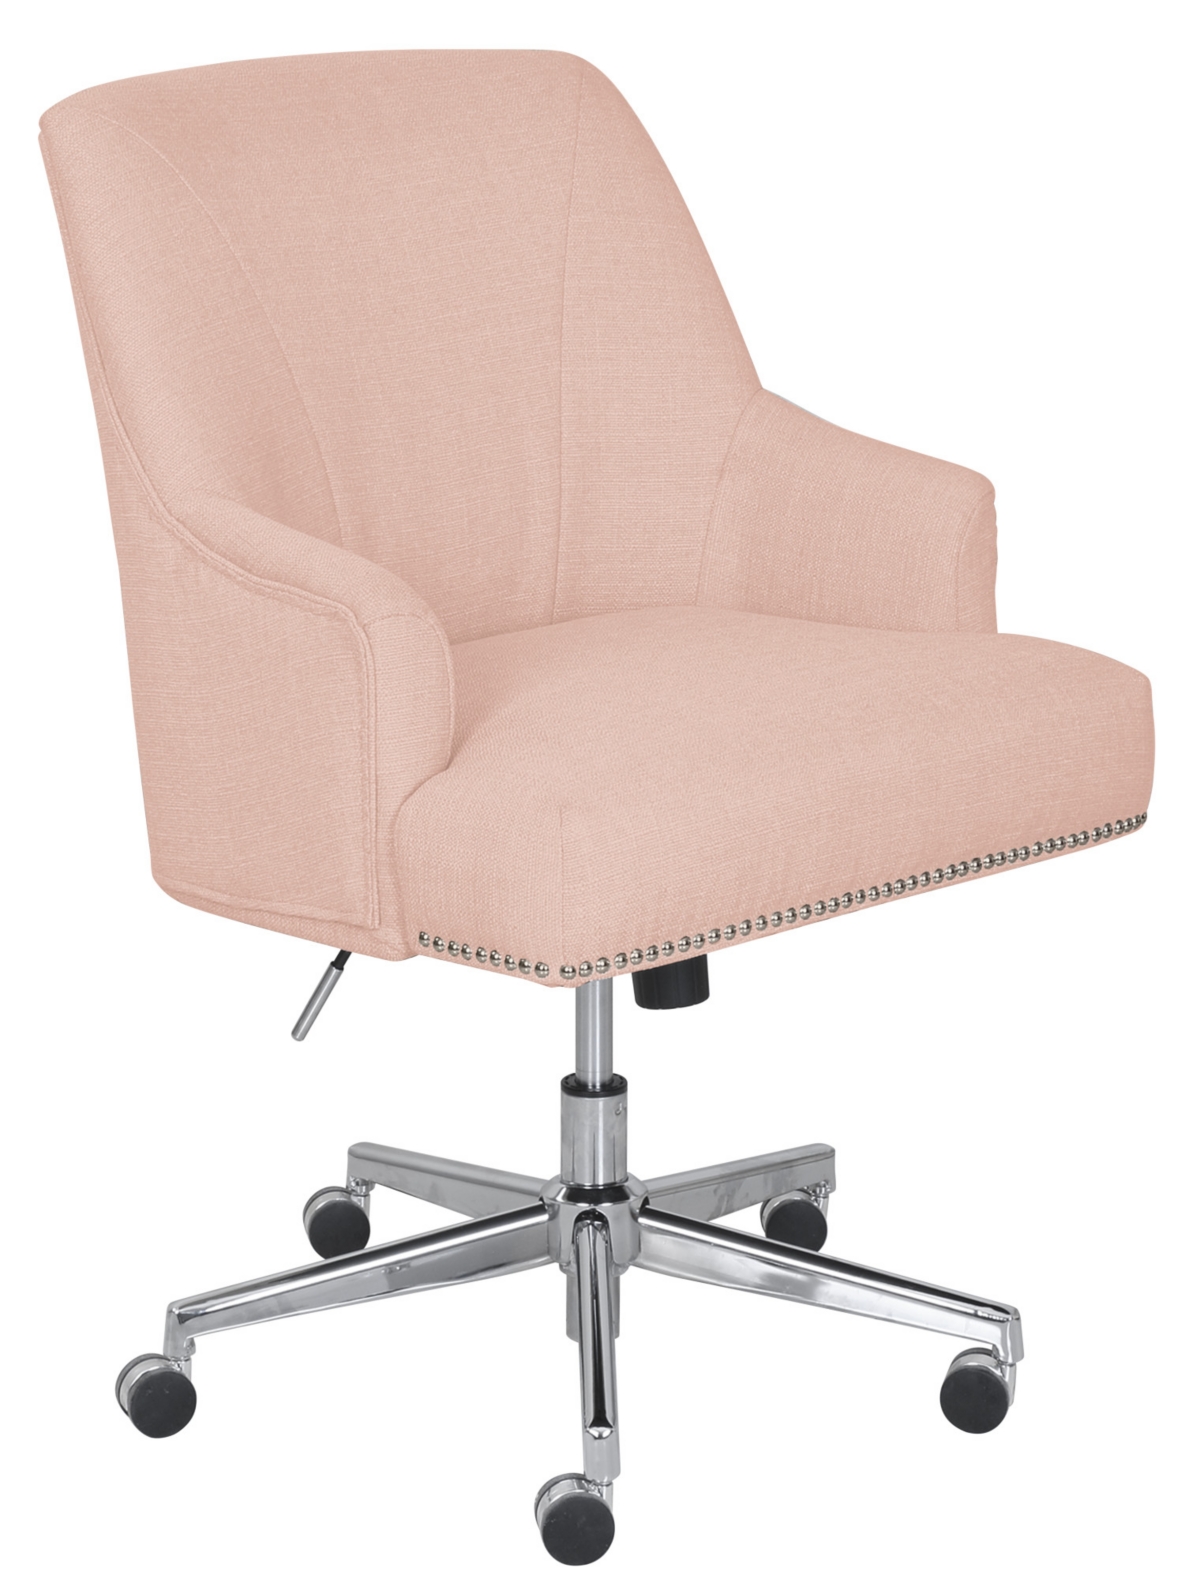 Serta Leighton Home Office Chair In Pink